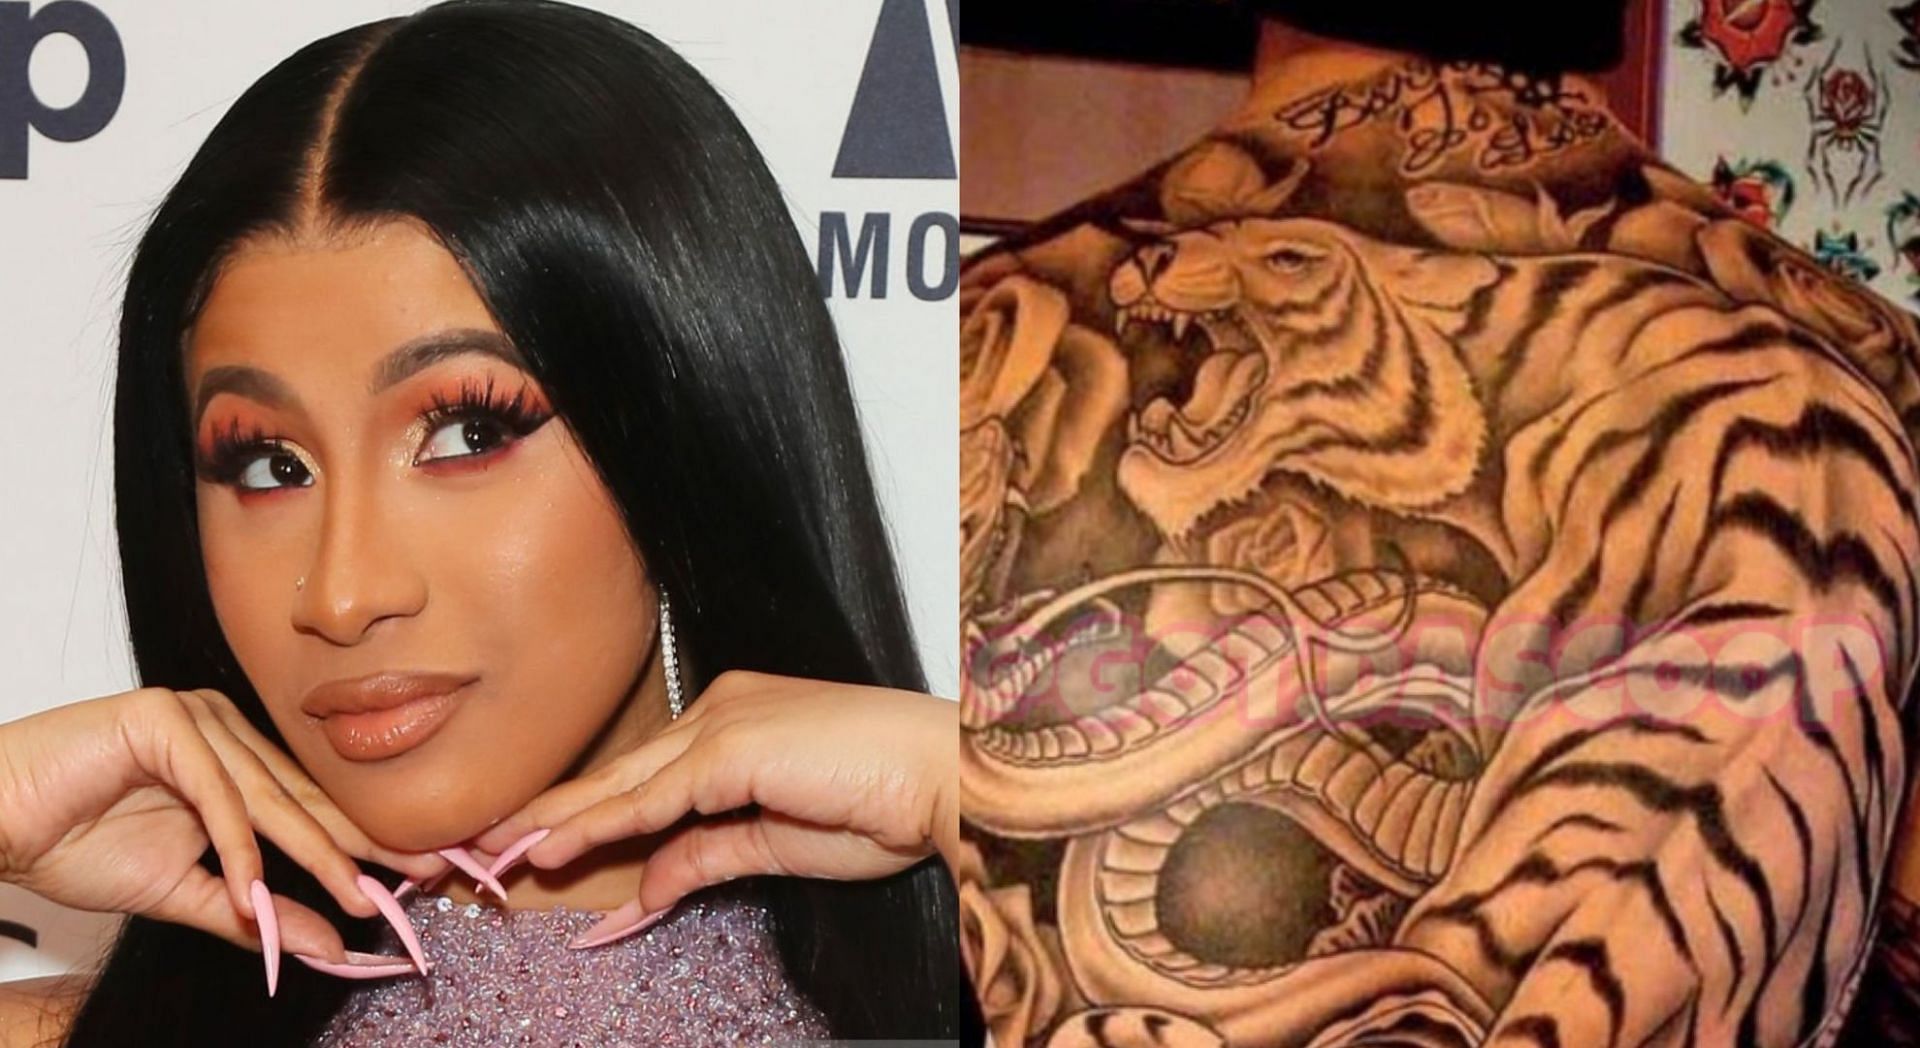 Cardi B won the lawsuit against Kevin Michael Brophy over her 2016 album cover tattoo art (Image via Getty Images and Get Da Scoop/Twitter)